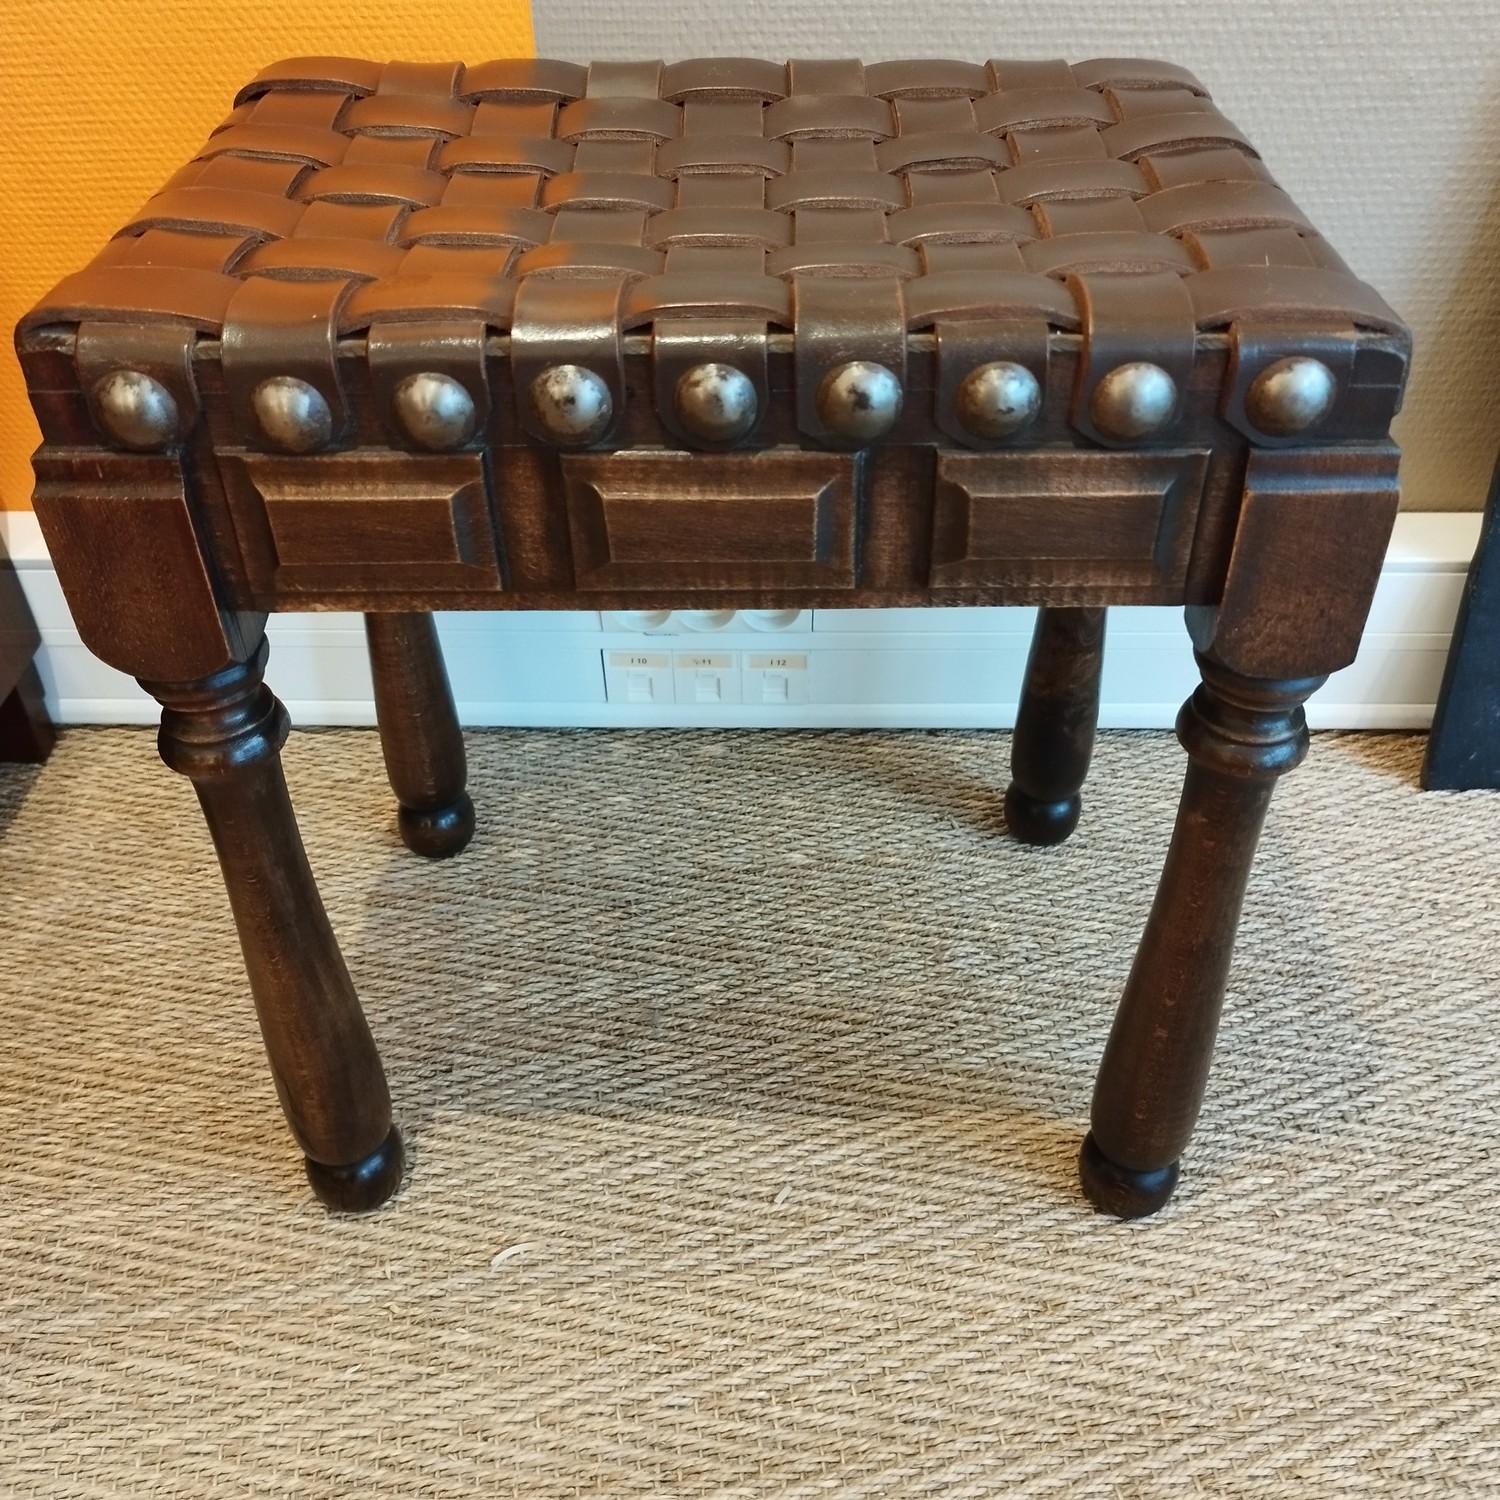 Nice and sturdy wood stool, with woven thick leather strips top. Very good condition.
Do not hesitate to ask me for a shipping quote.